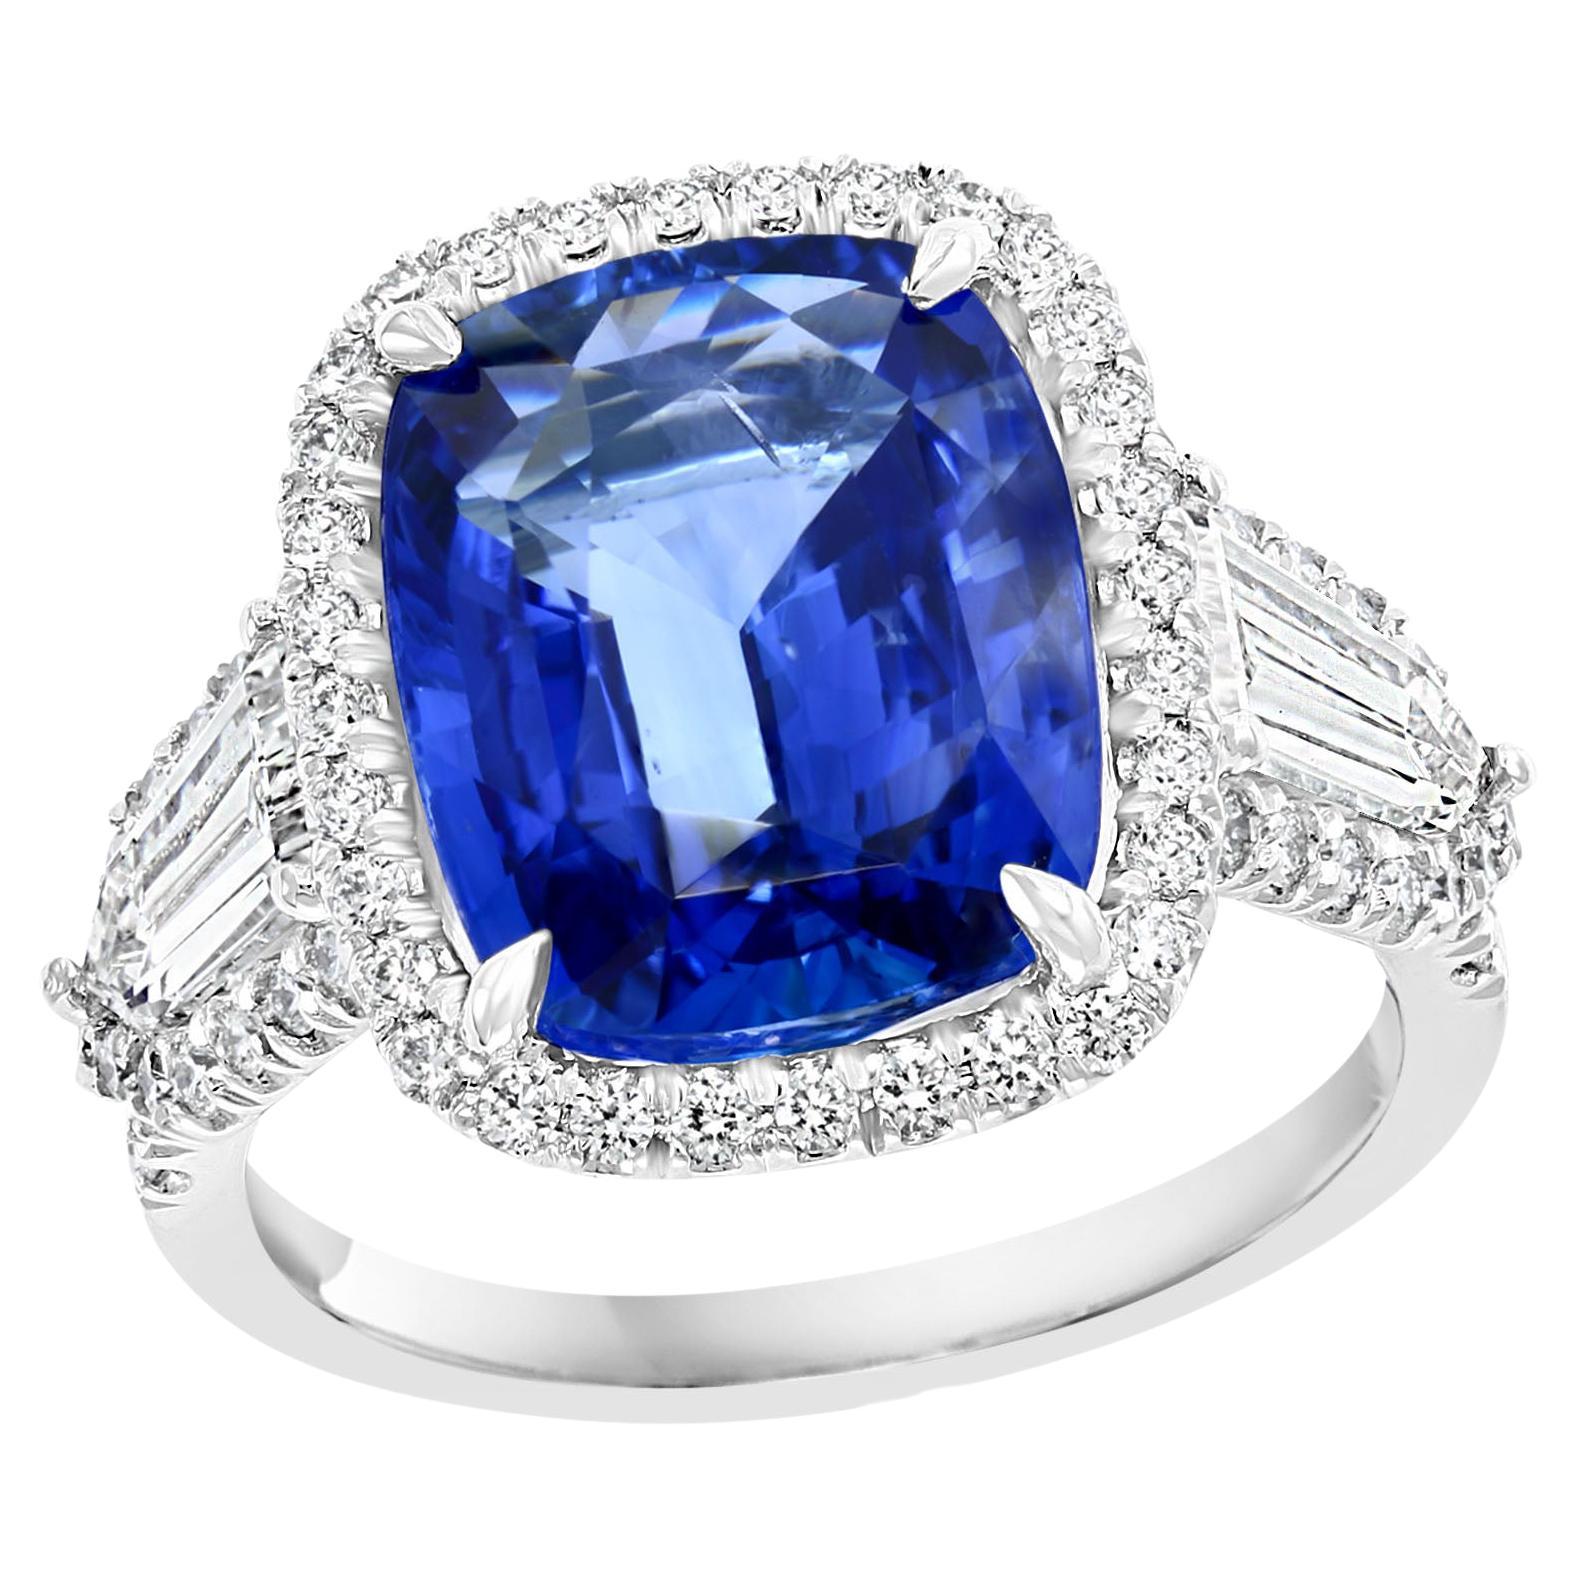 7.51 Carat Cushion Cut Sapphire and Diamond Engagement Ring in Platinum For Sale